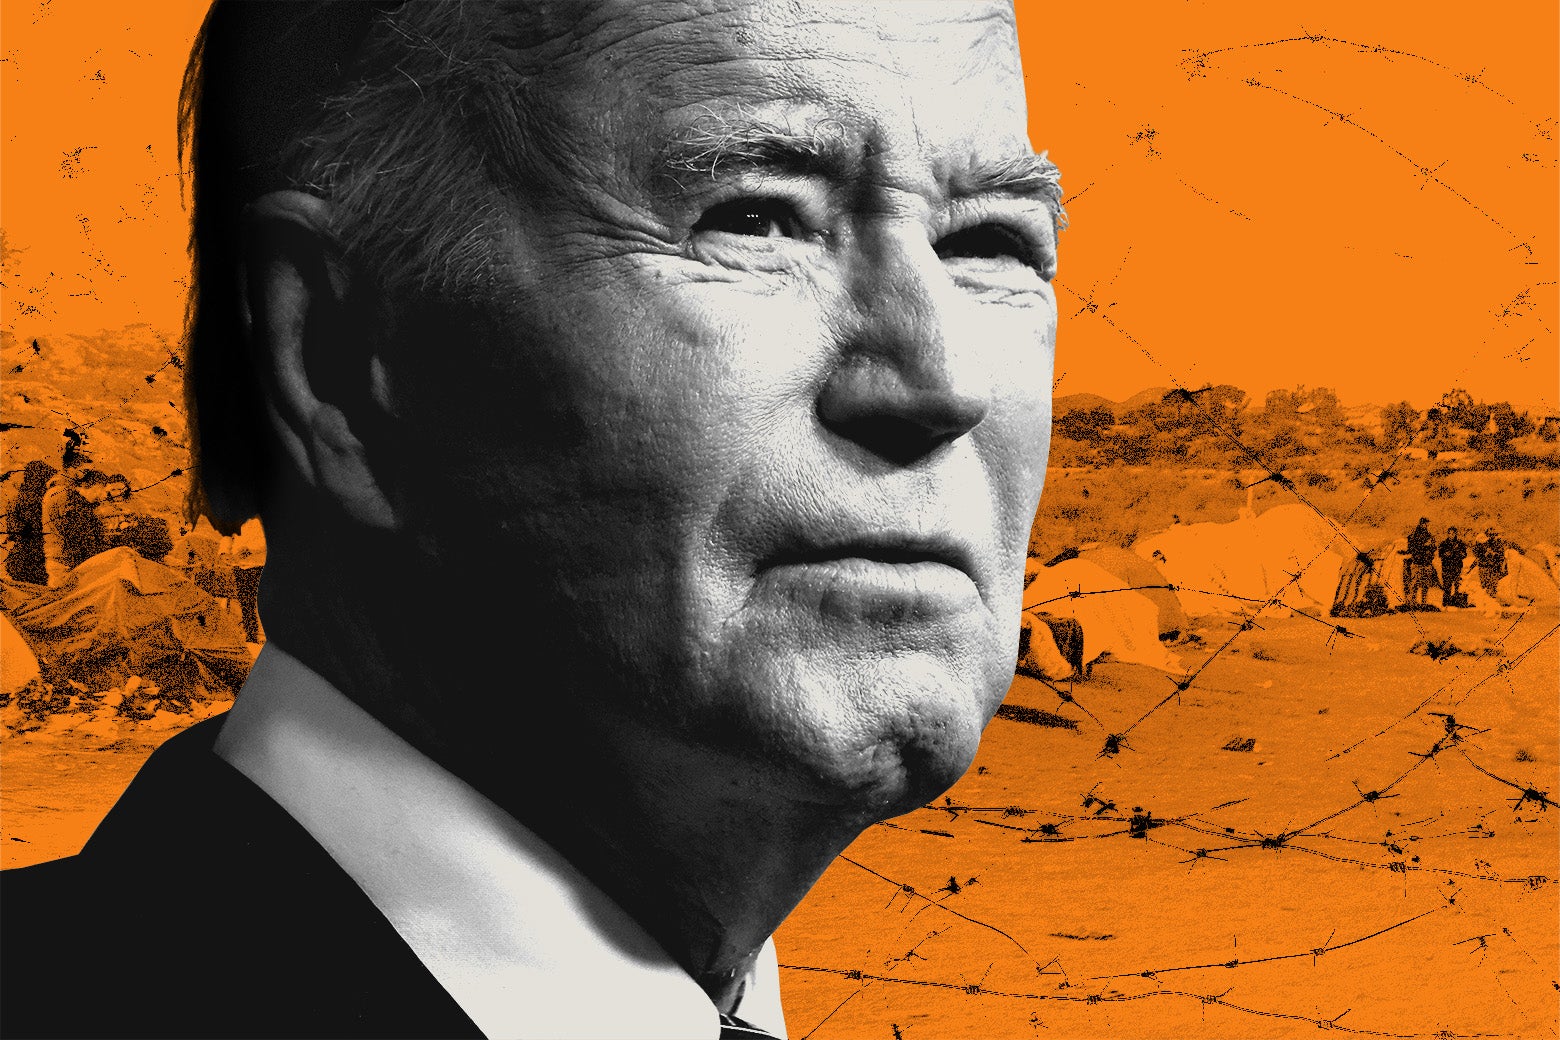 A photo illustration of President Biden overlaid on images from the southern U.S. border and migrant camps in the U.S.